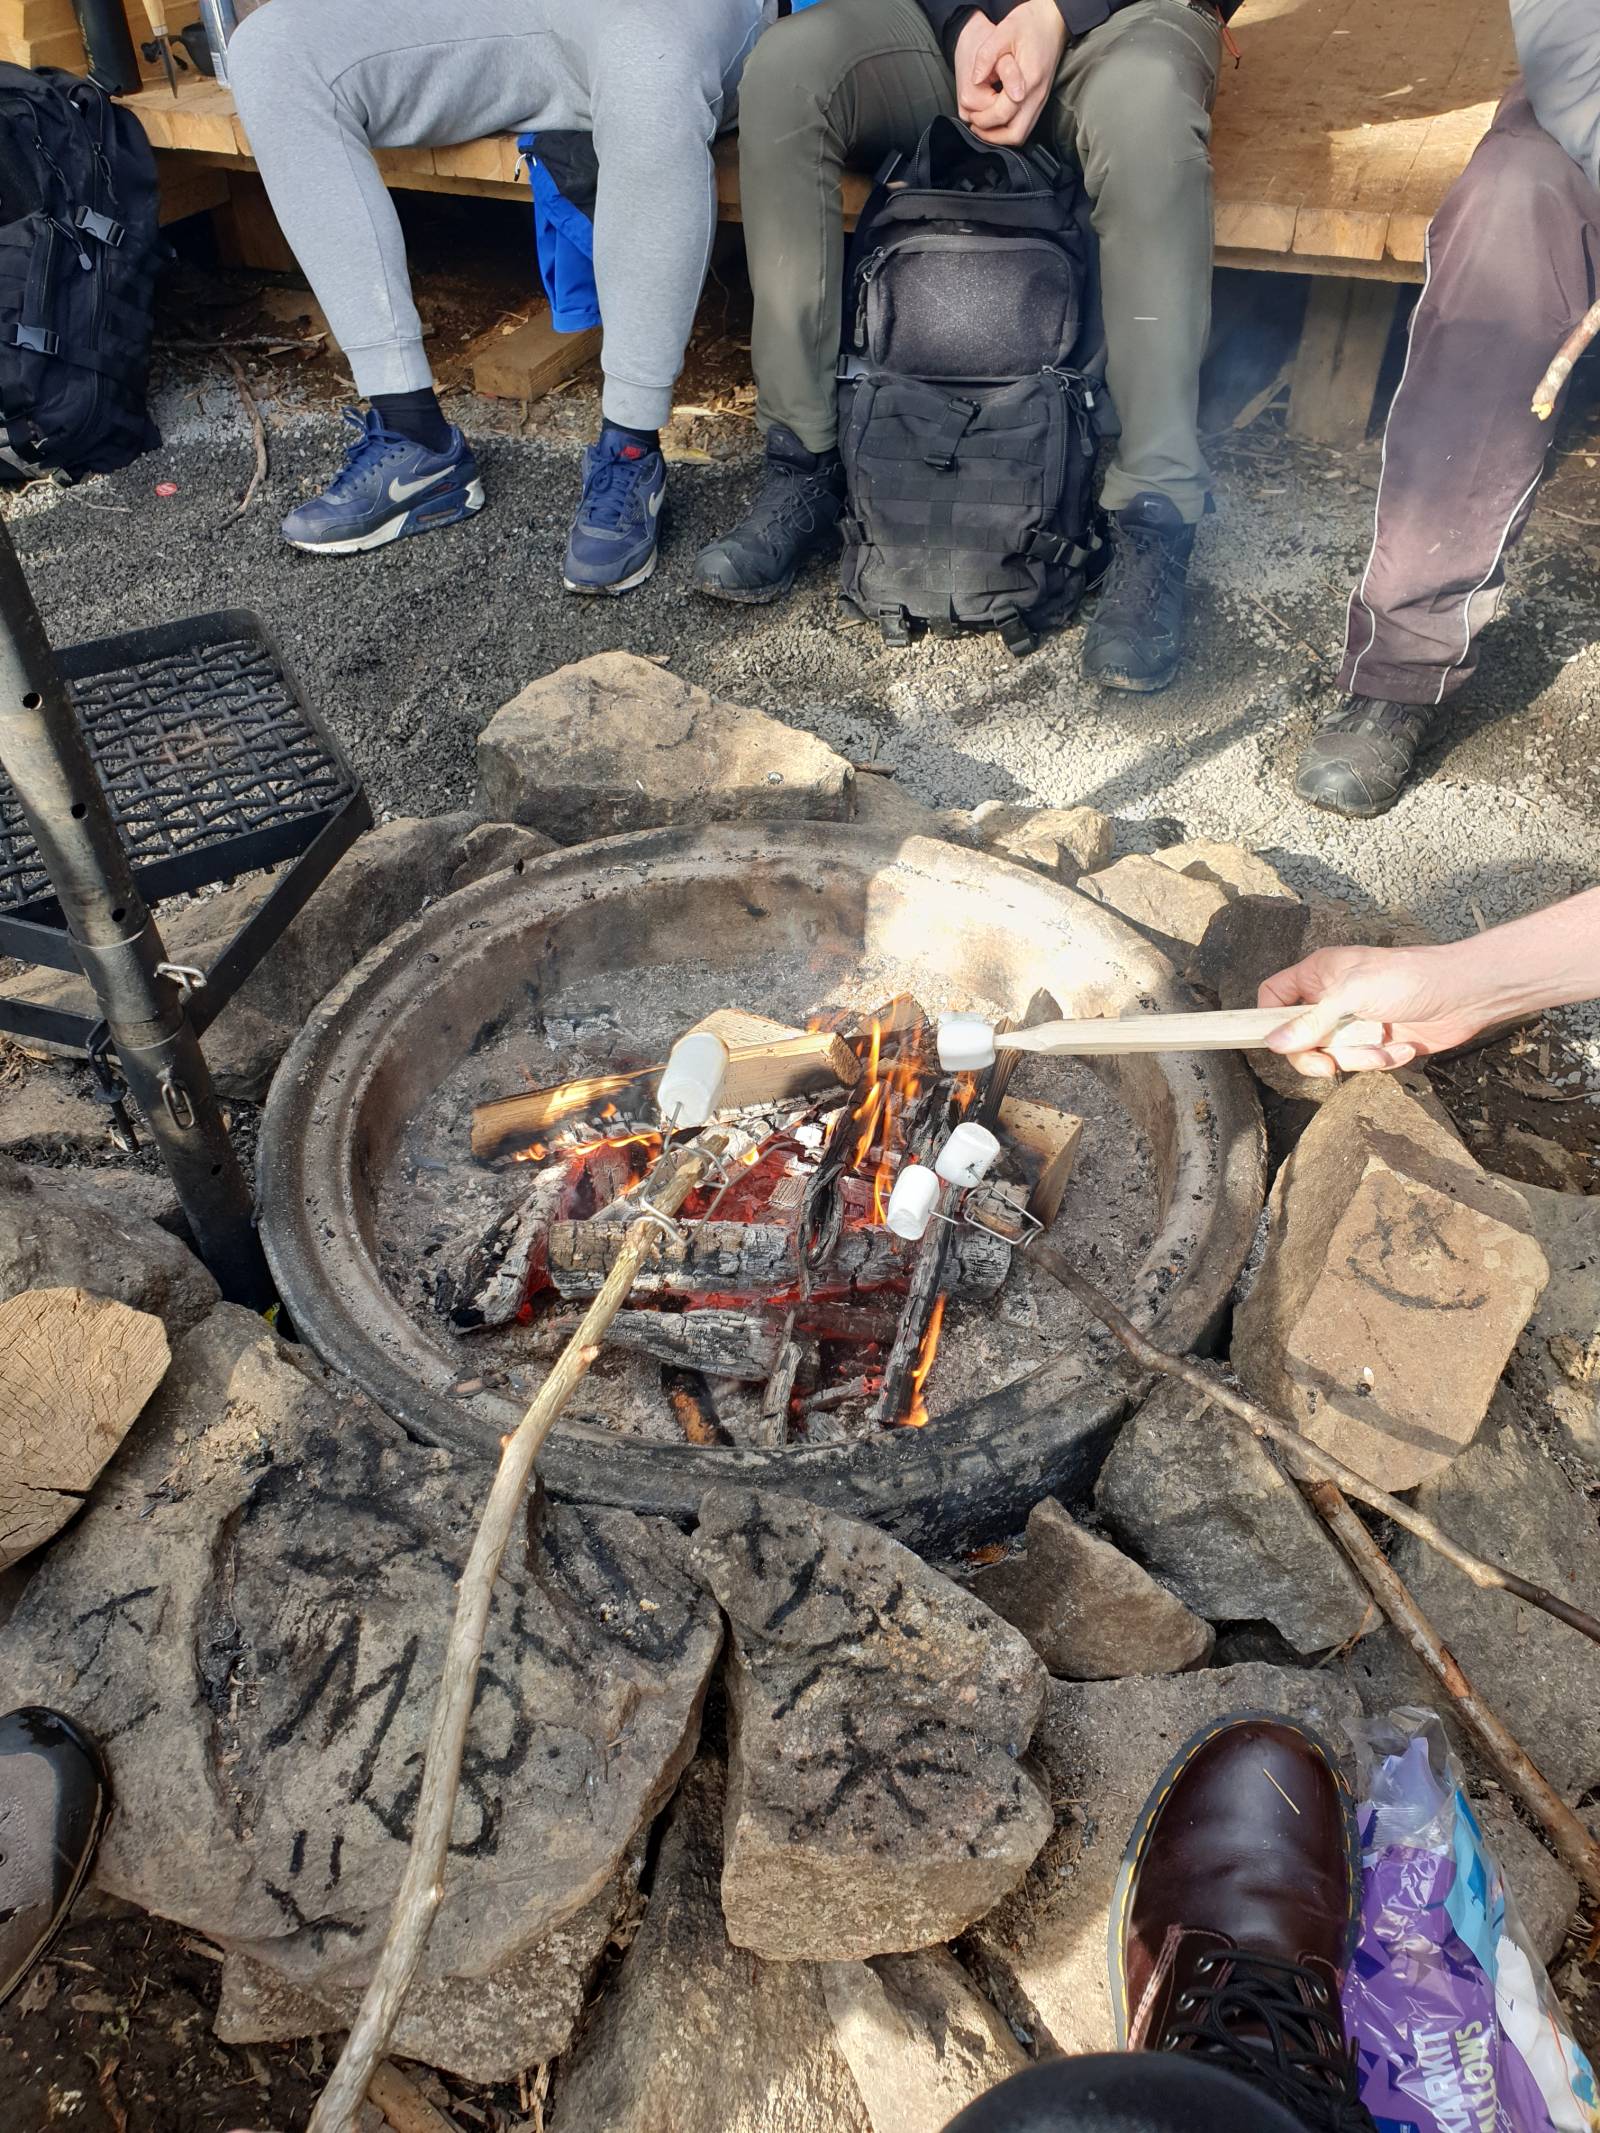 People holding marshmallows on a stick in a fire